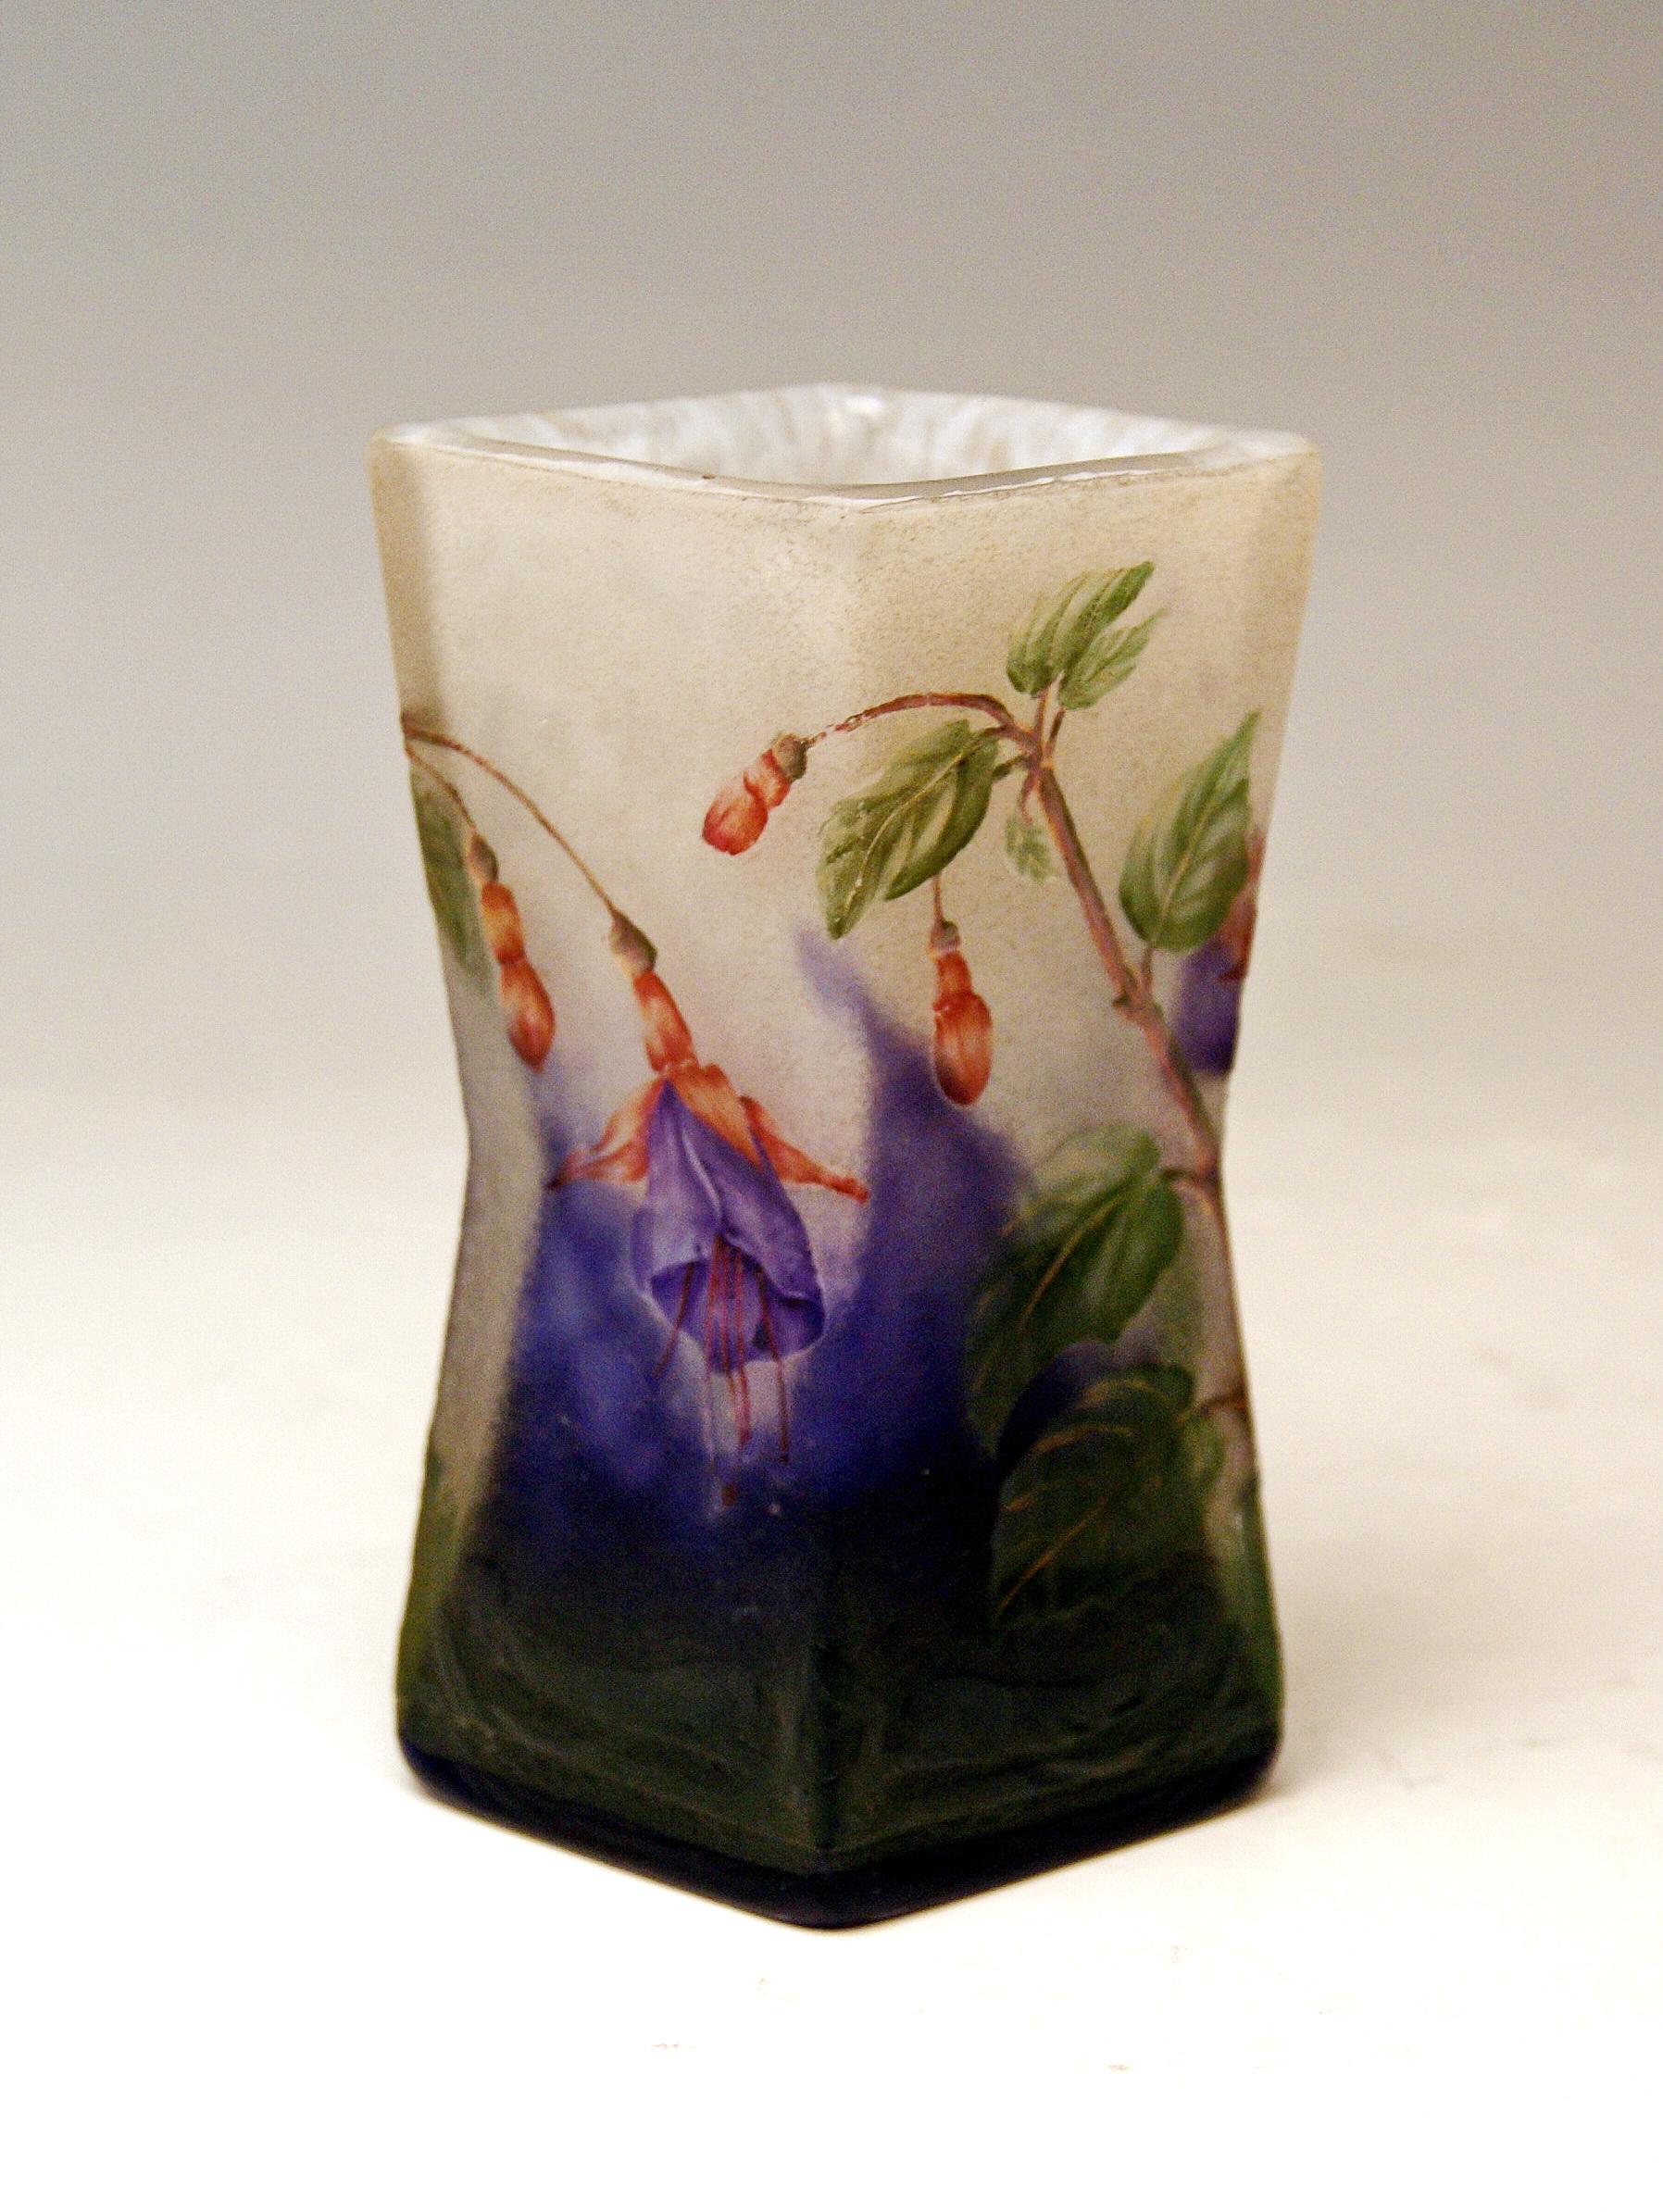 Daum Nancy Cameo finest art glass rhomb-shaped vase of Art Nouveau period.
Excellently decorated with interesting flowers: These are fuchsias.

Manufactory:
Daum Frères / made in France / Nancy, Lorraine, circa 1900-1905. 

Designer: Daum